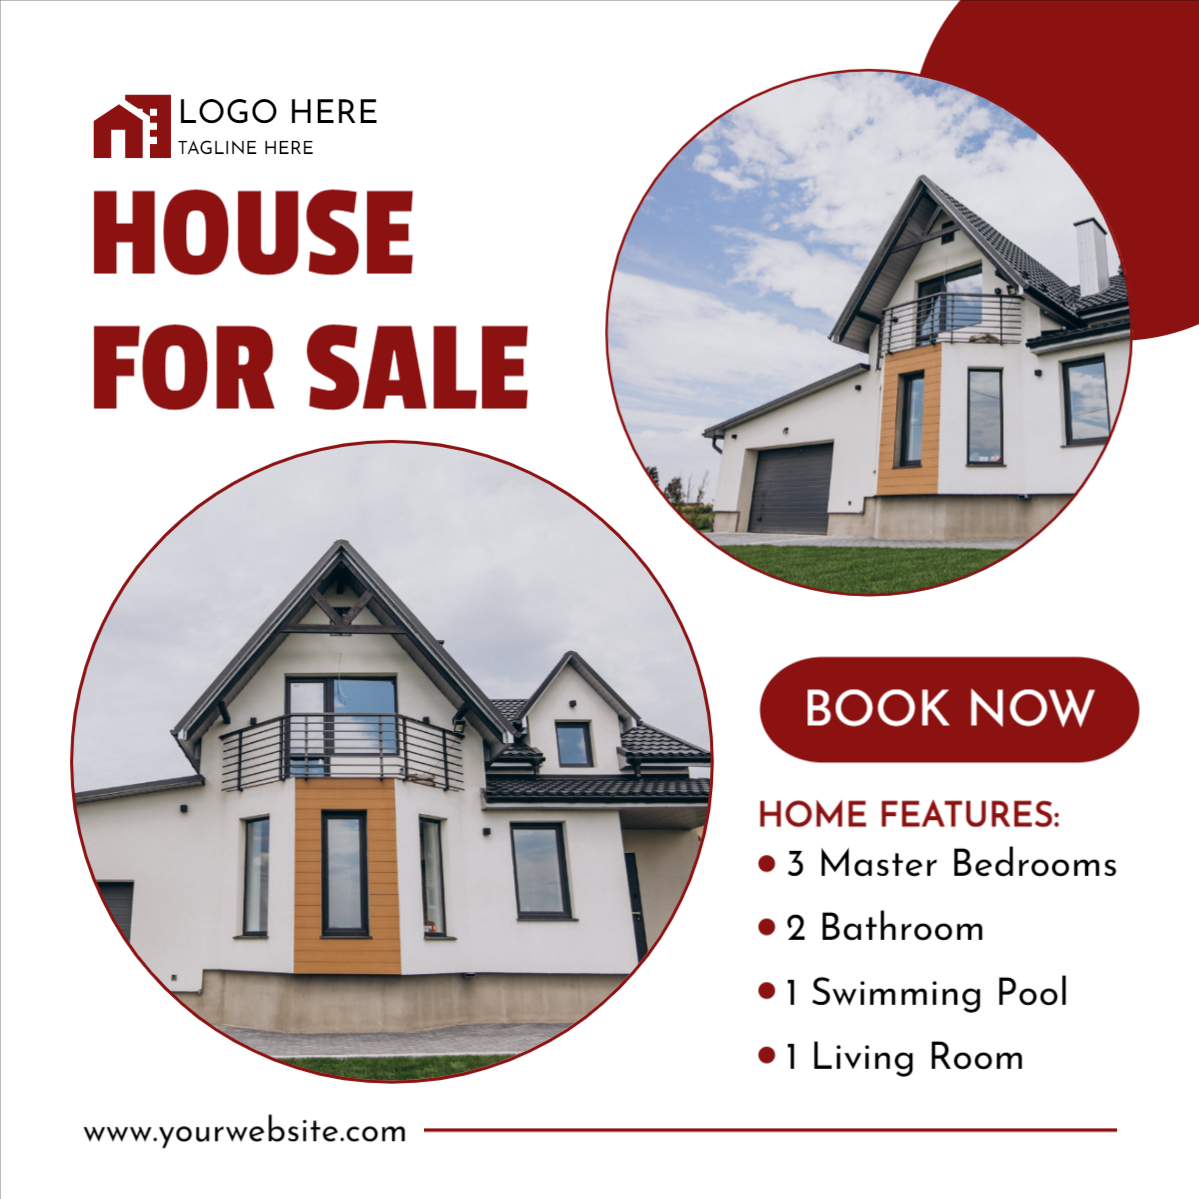 House For Sale banner design download for free